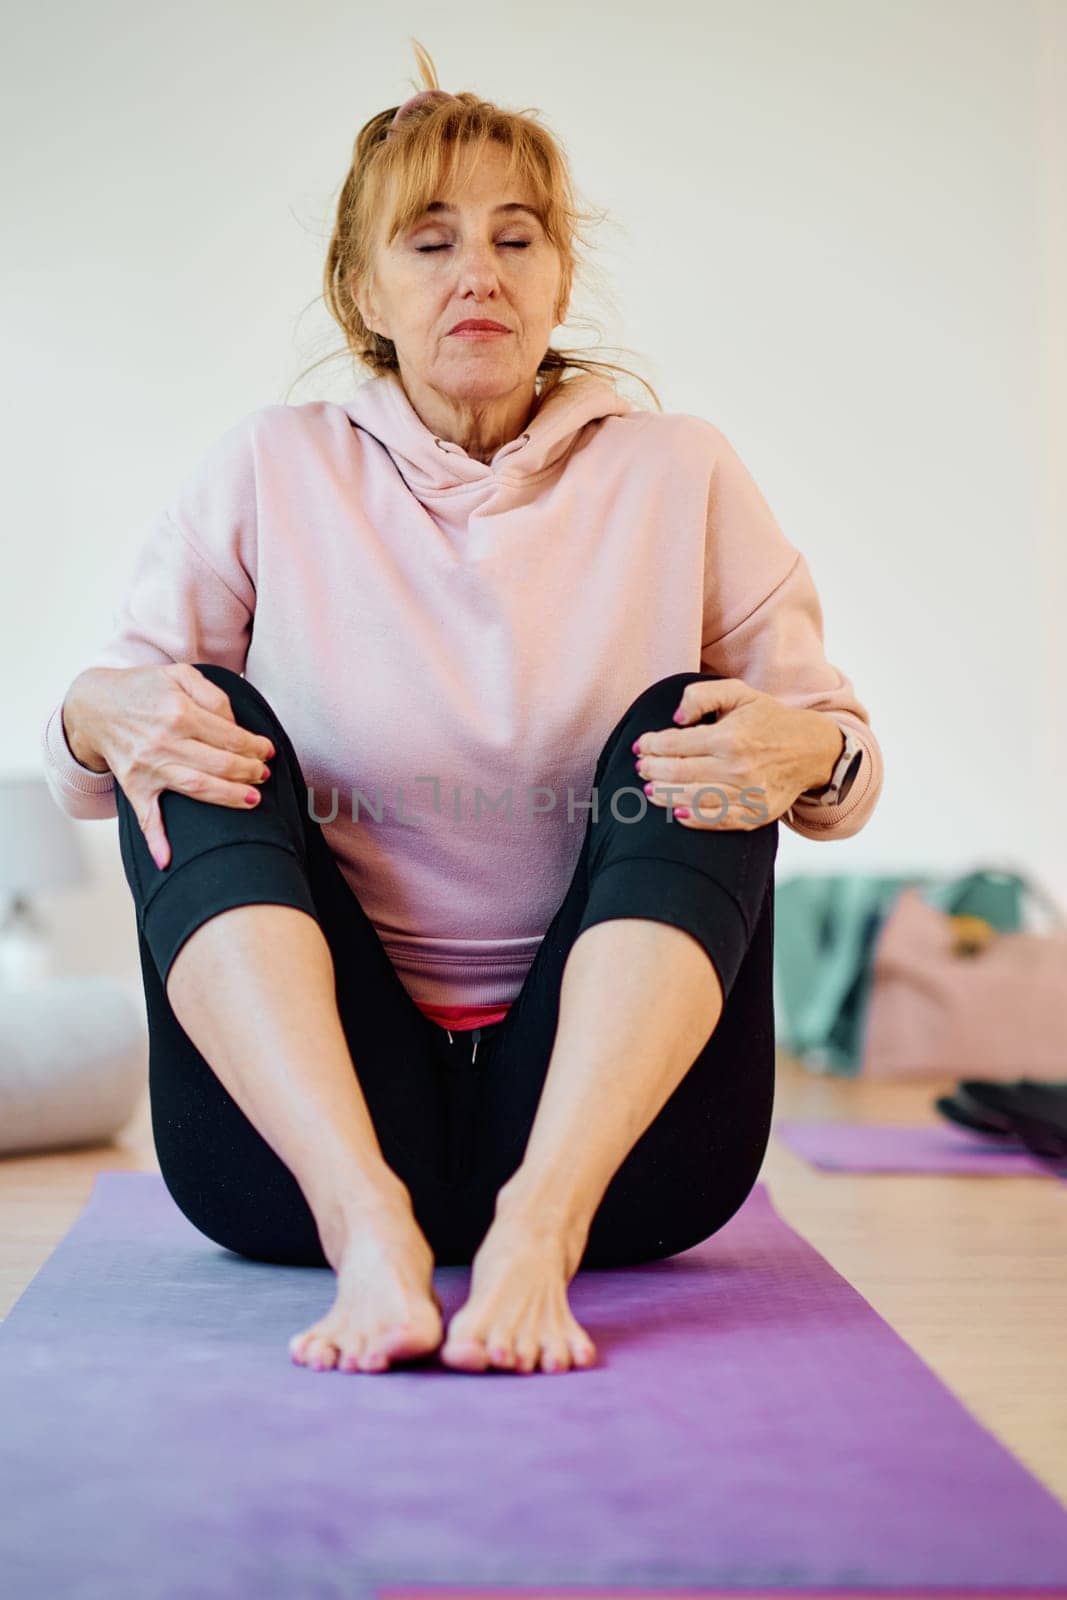 In a sunlit space, a senior woman gracefully practices rejuvenating yoga, focusing on neck, back, and leg stretches, embodying serenity and well-being by dotshock